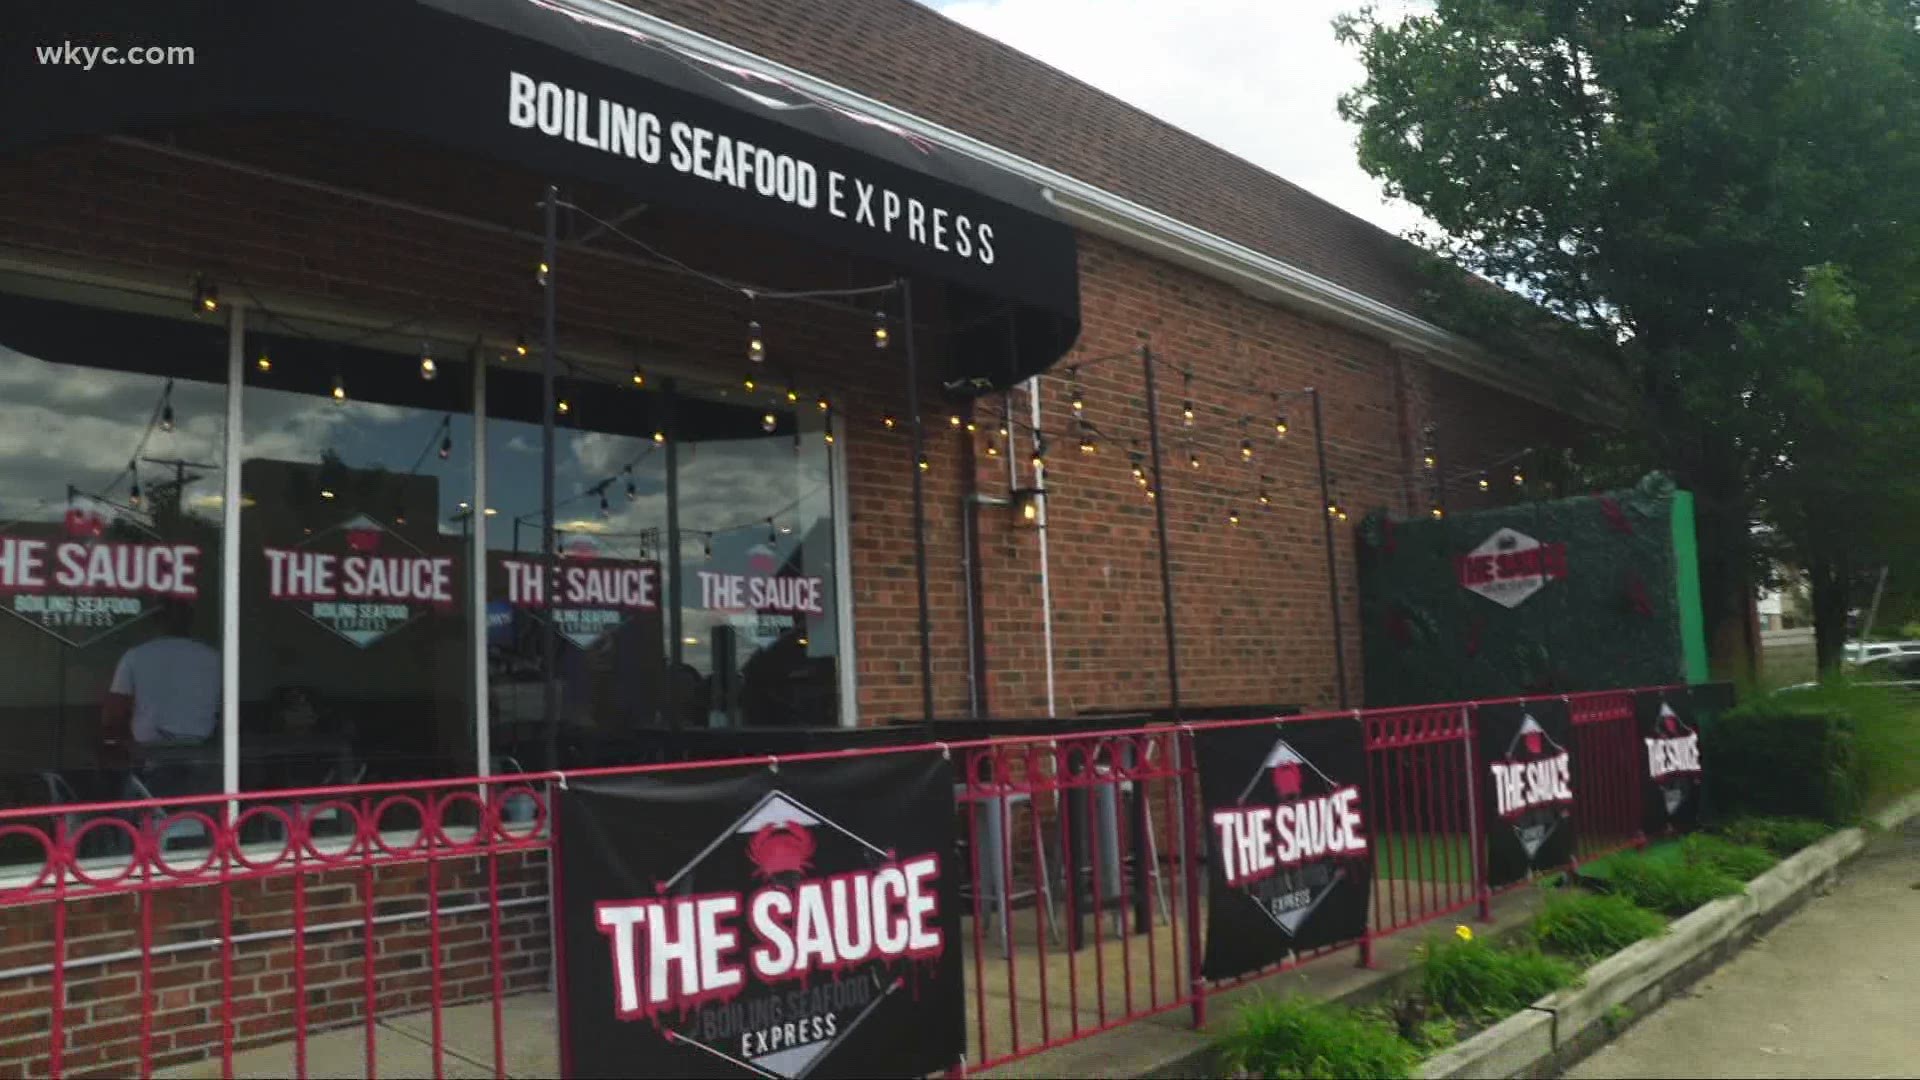 Doug Trattner's Diversity in Dining series continues with The Sauce Boiling Seafood Express. The restaurant is set to open a new location downtown this month.